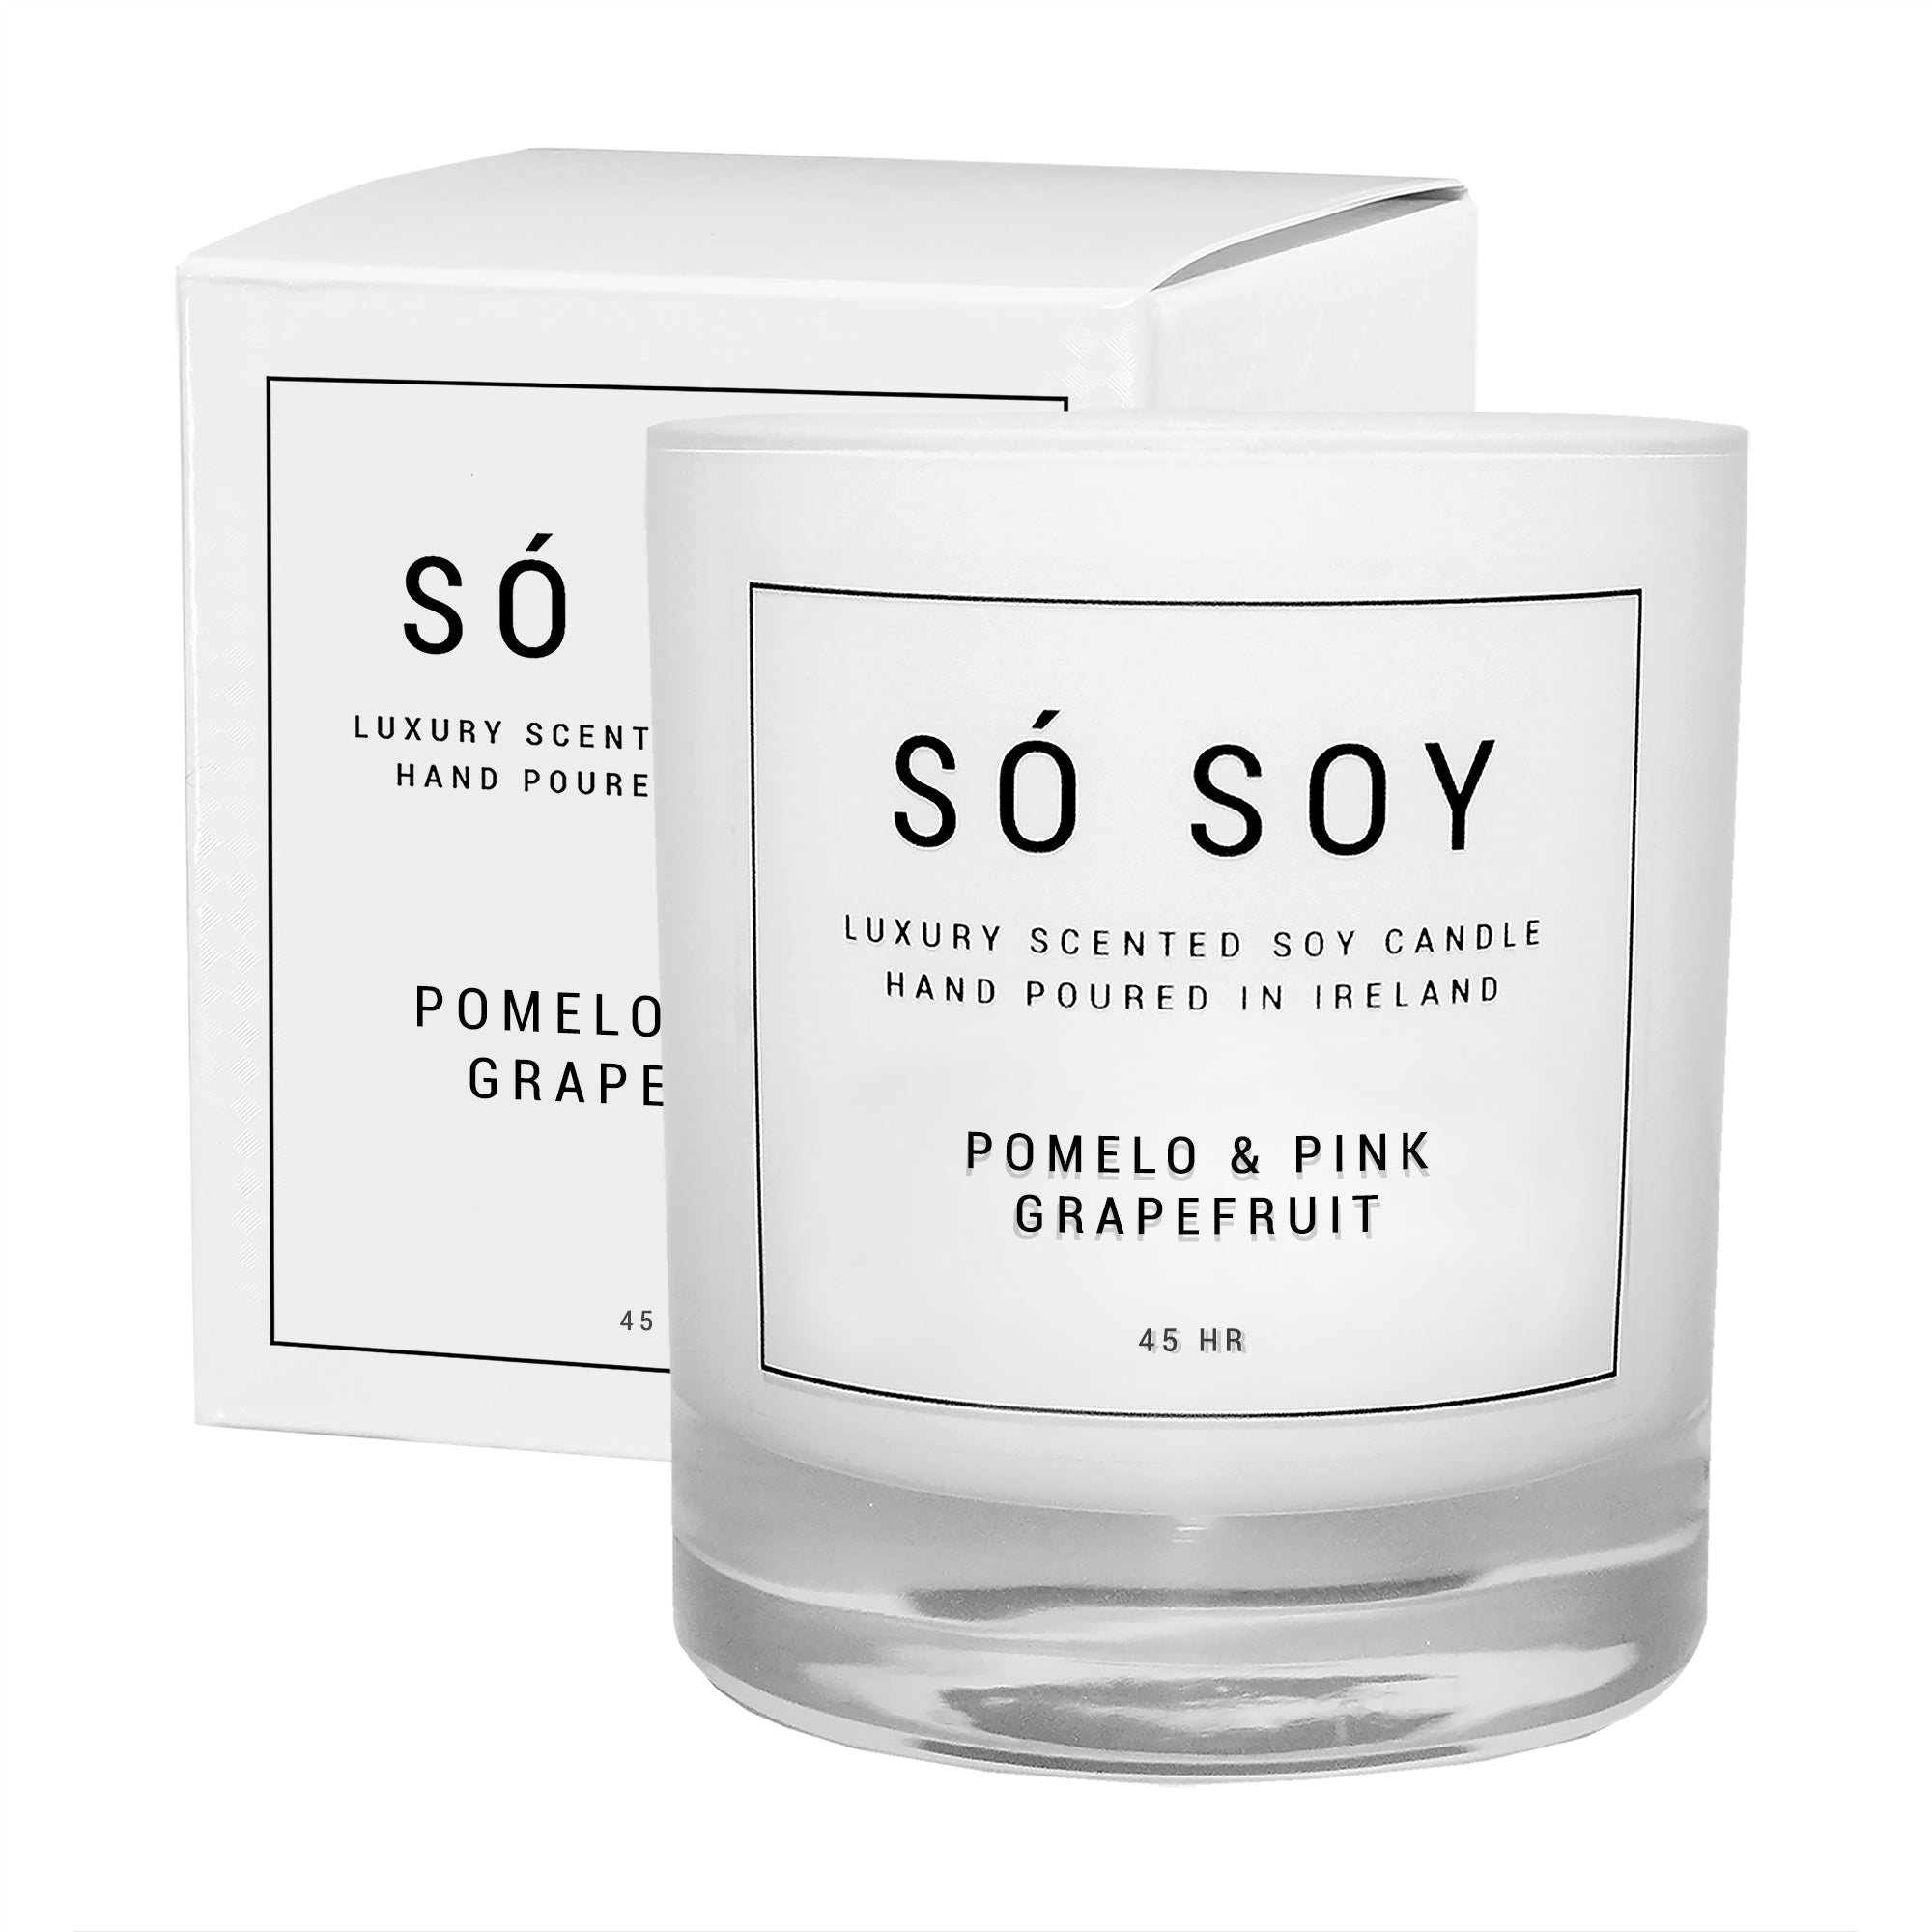 Pomelo and Pink Grapefruit Candle by So Soy Hand Poured in Ballymoney